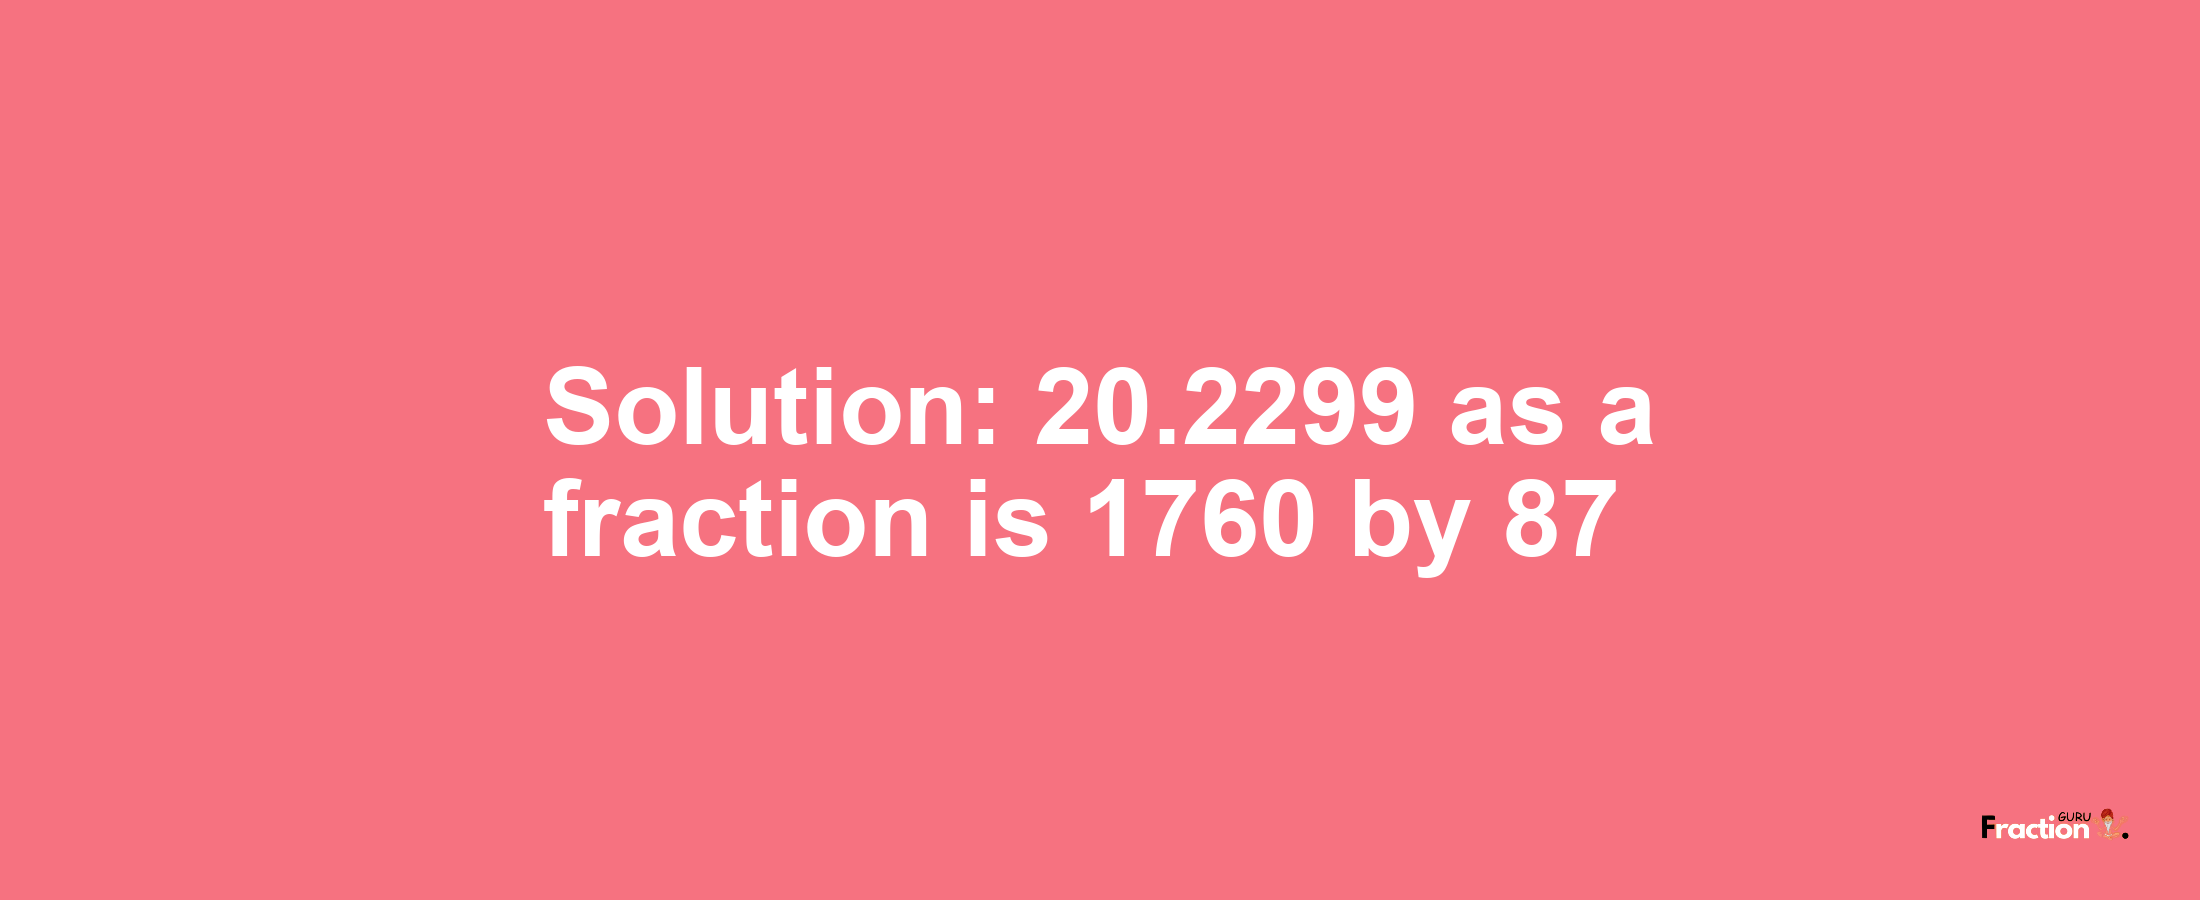 Solution:20.2299 as a fraction is 1760/87